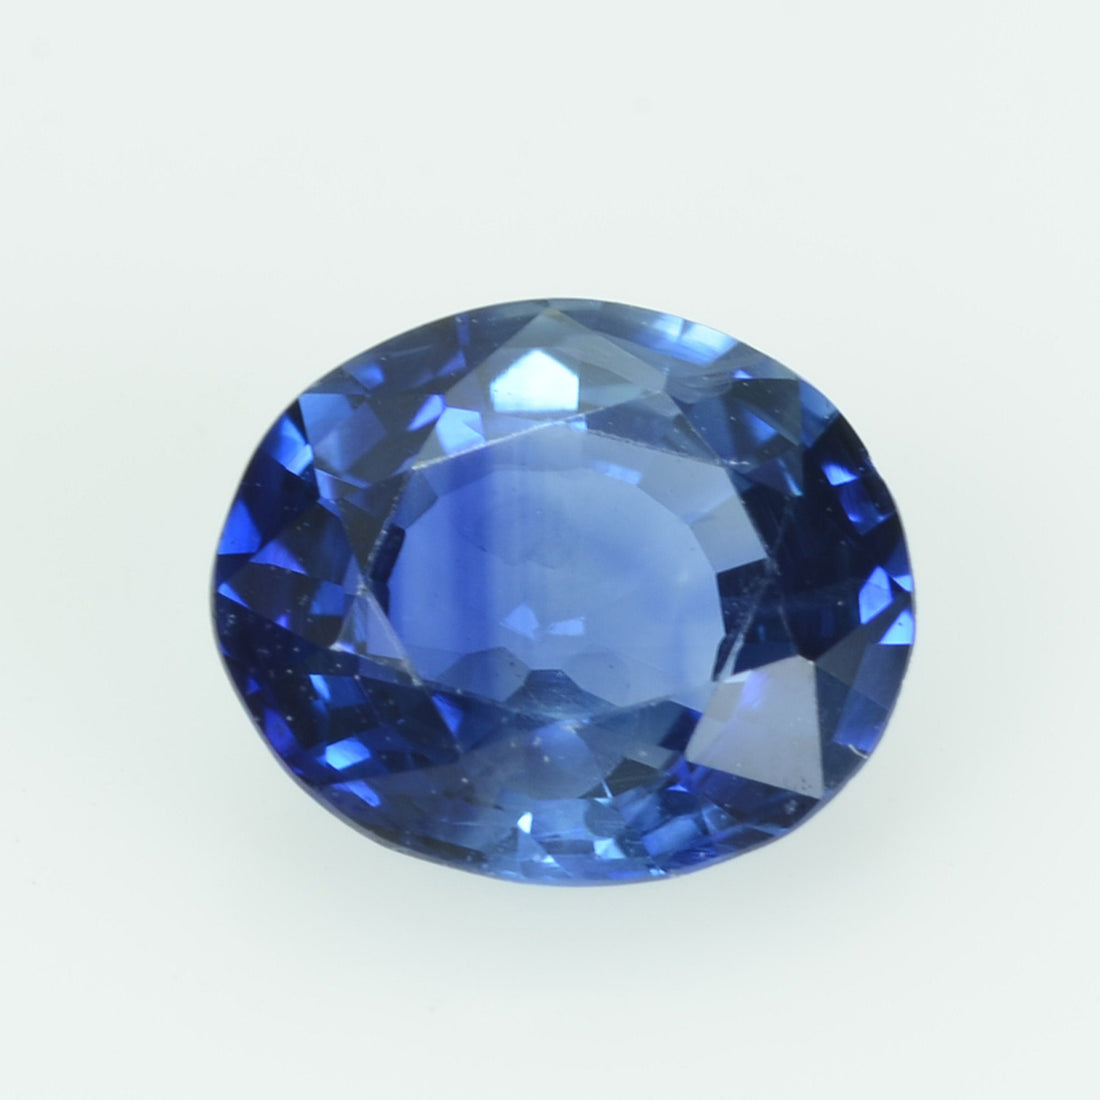 0.84 Cts Natural Blue Sapphire Loose Gemstone Oval Cut AGL Certified